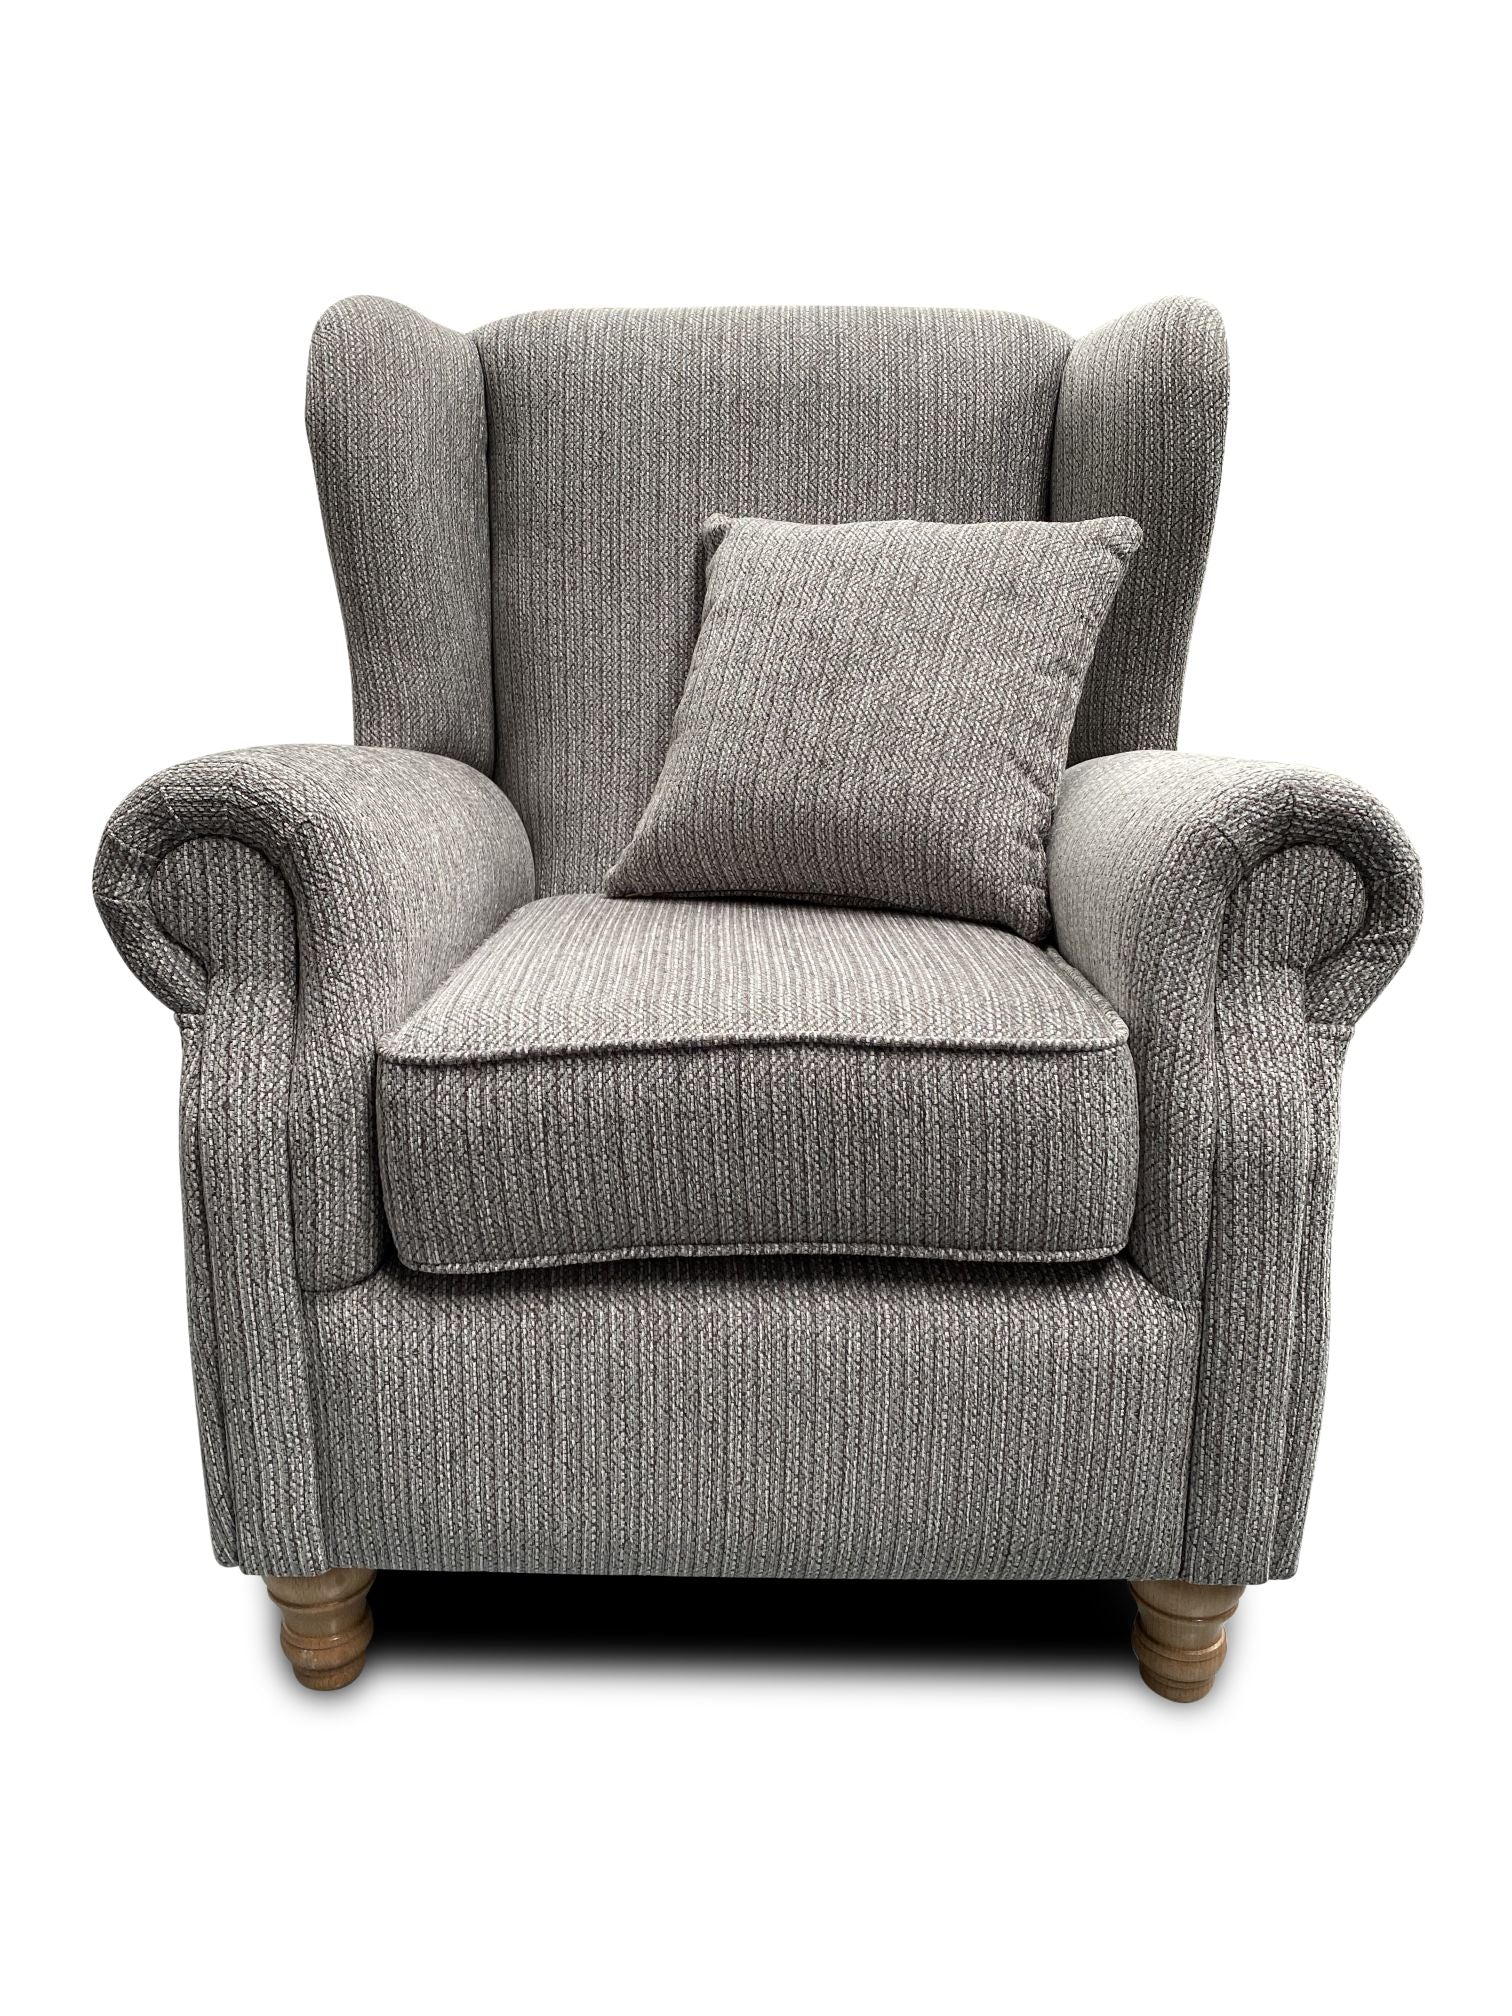 Bentley Debbie High Back Chair Chairs- KC Sofas